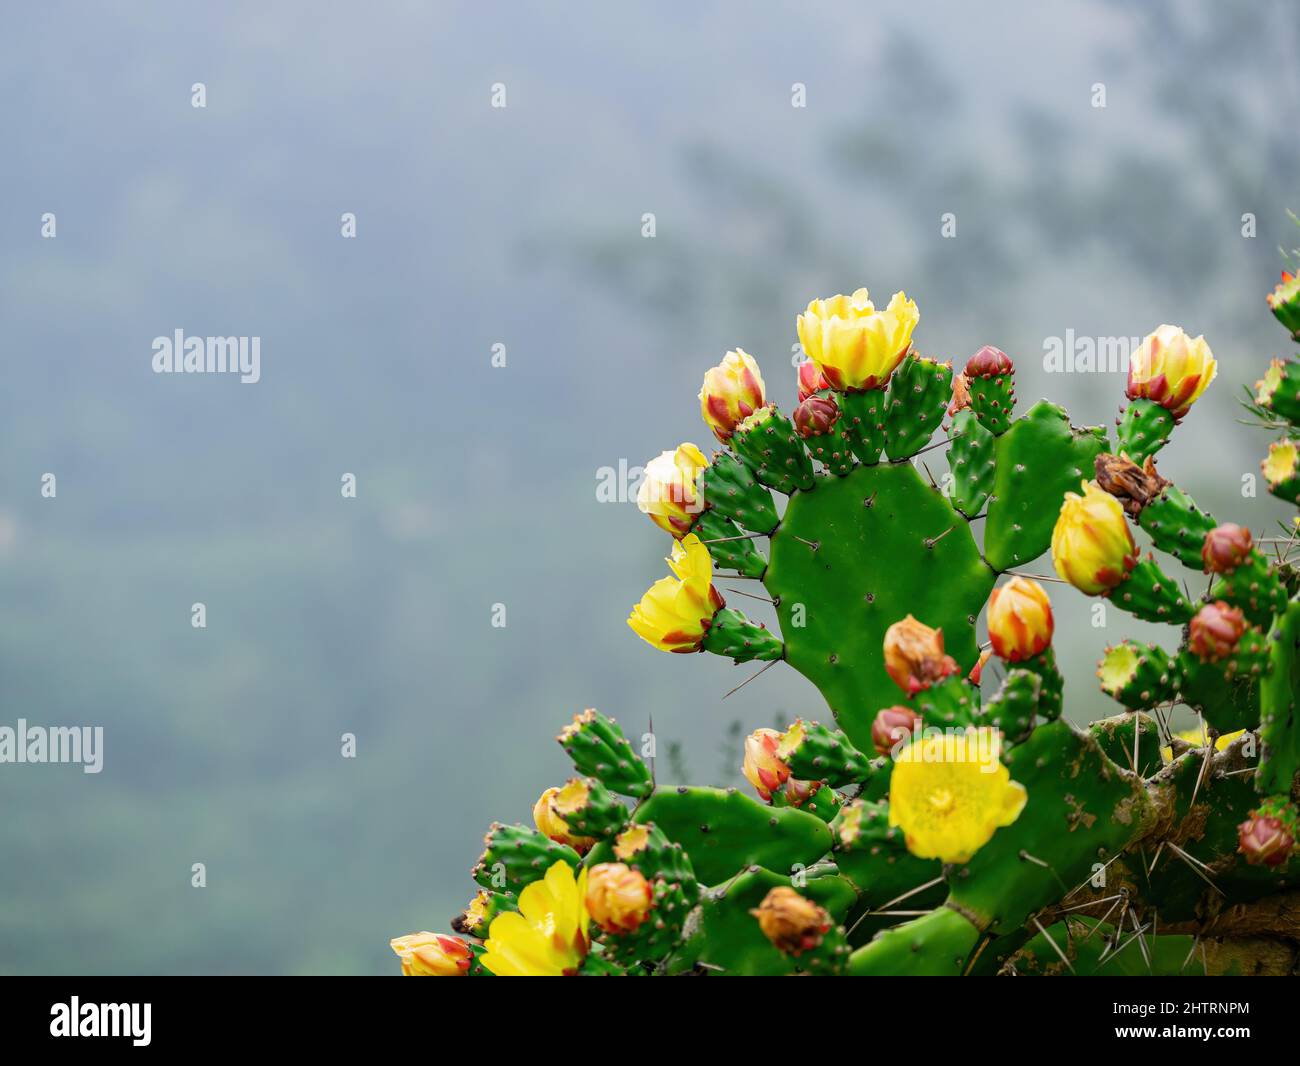 Overcast view of the opuntia cactus blossom at Kinmen, Taiwan Stock Photo